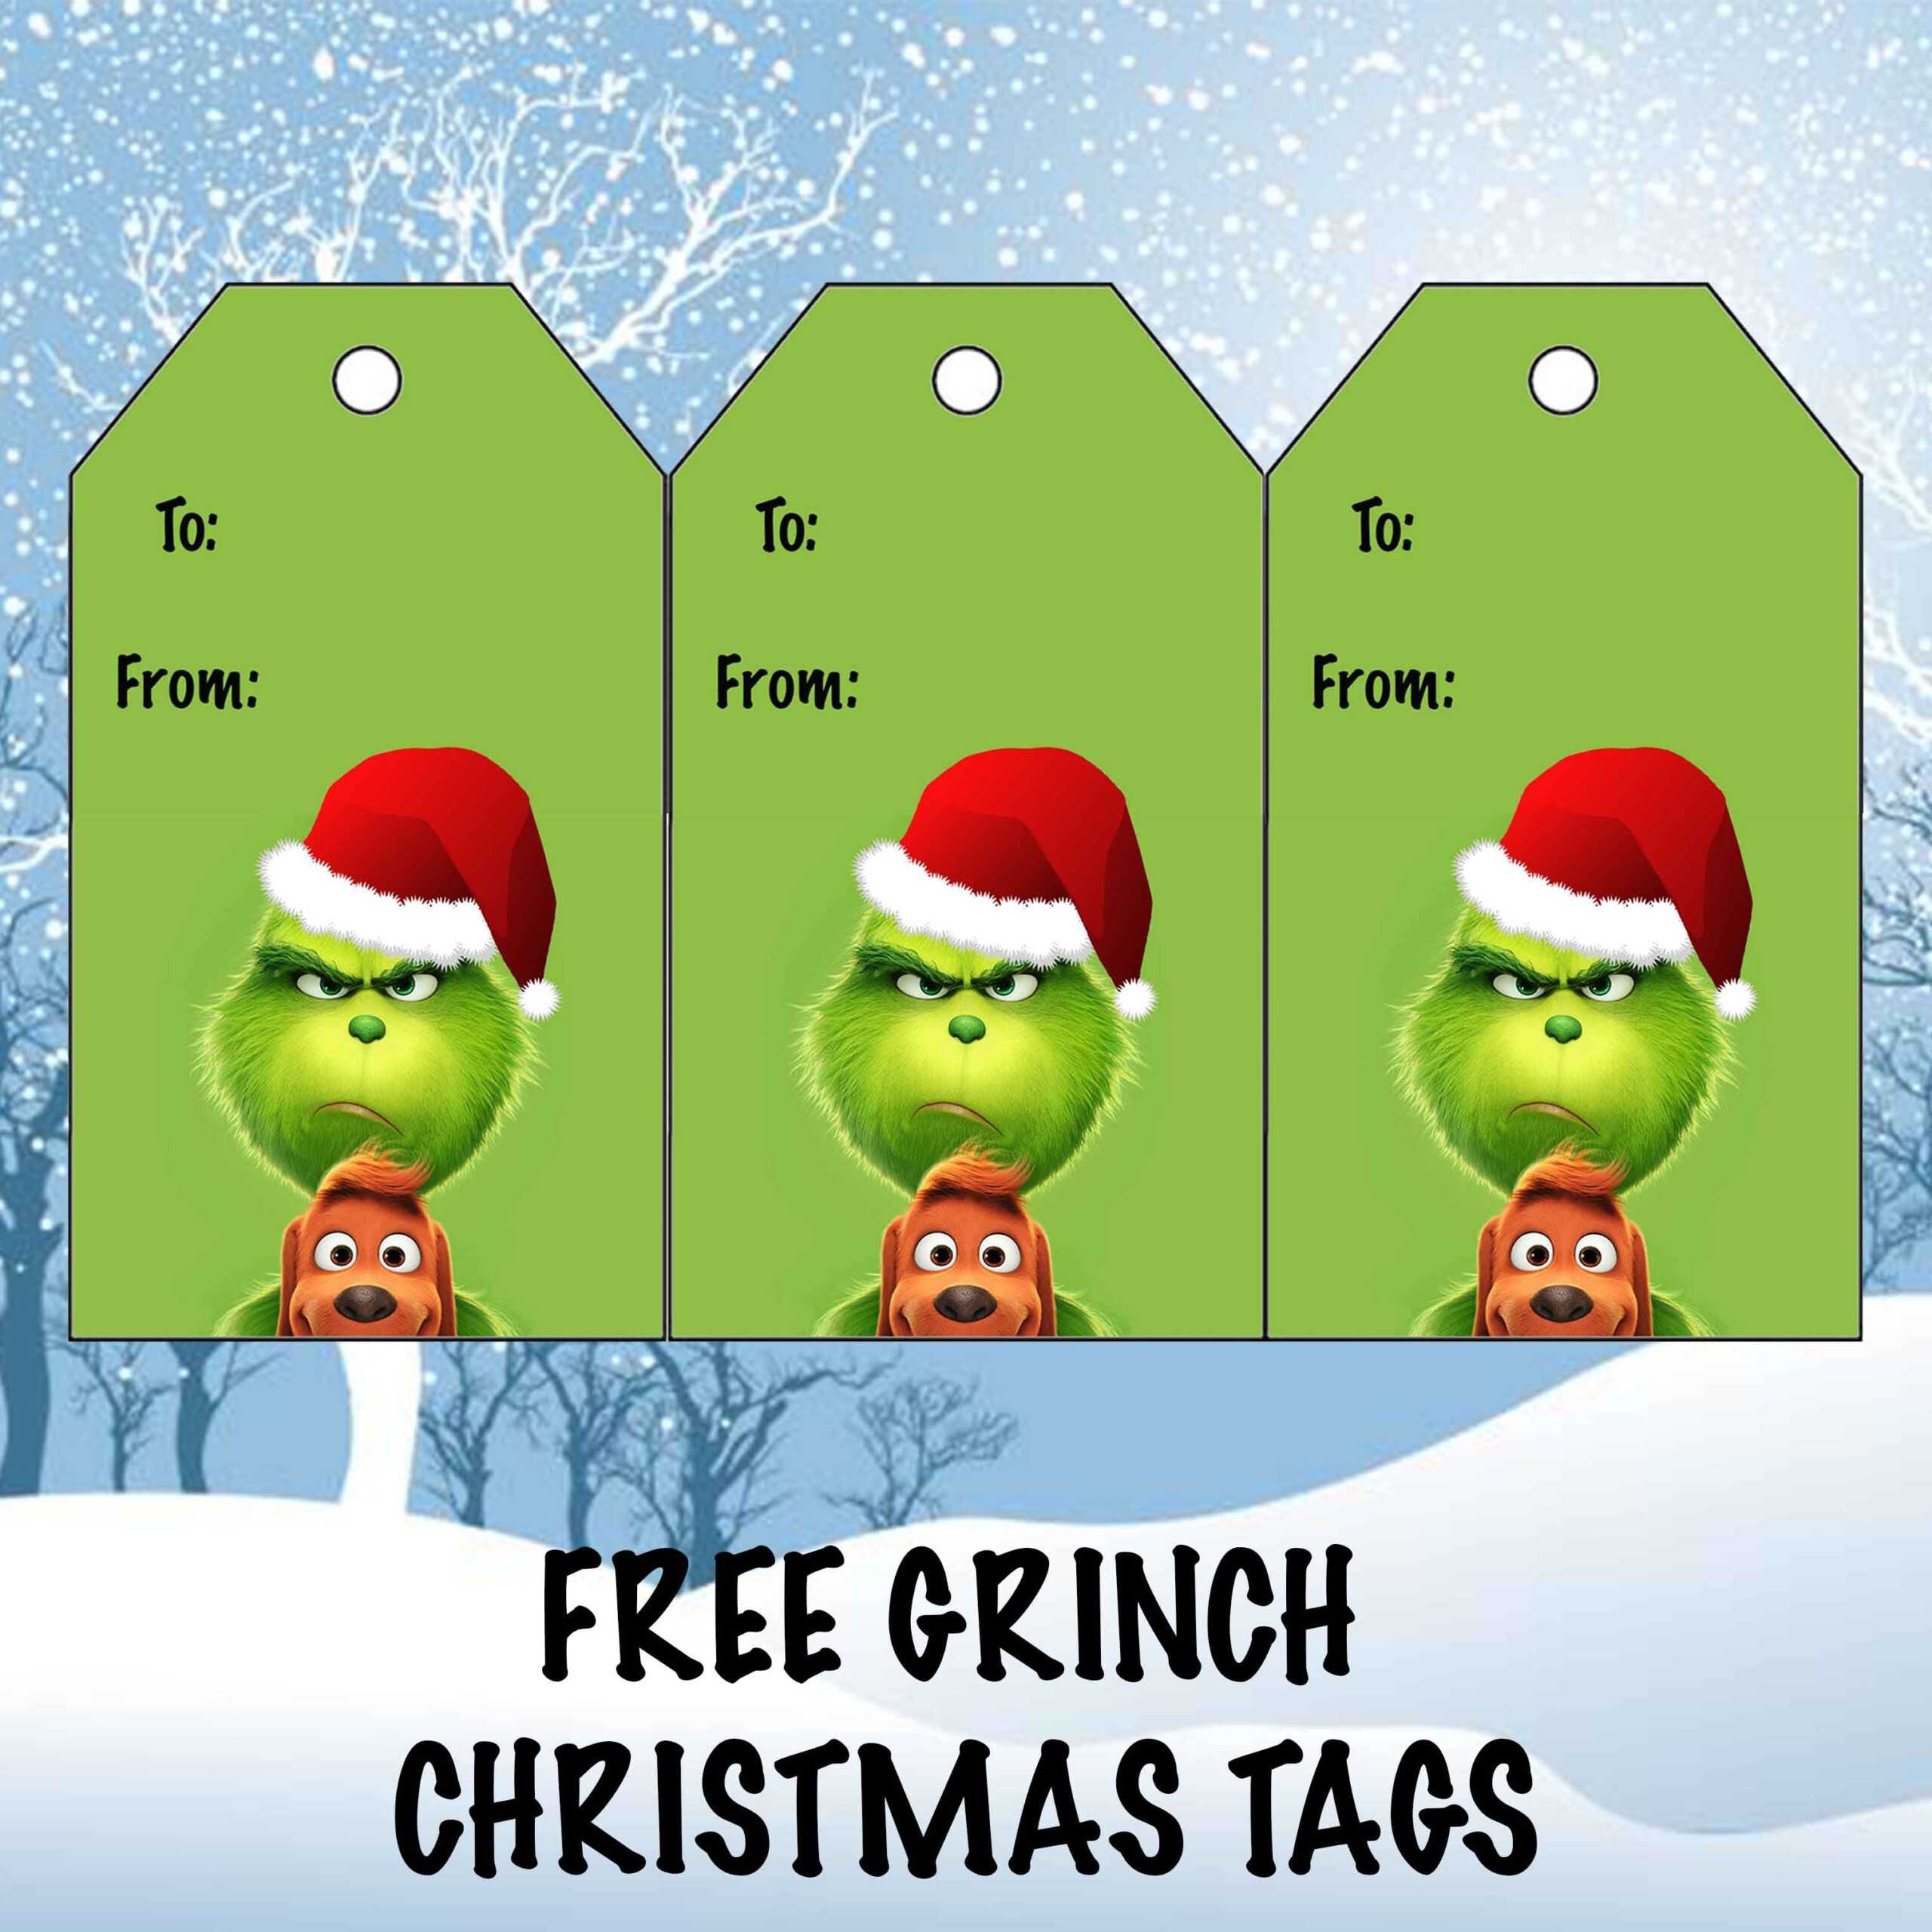 FREE Grinch Christmas Gift Tags Grinch Christmas Grinch Christmas